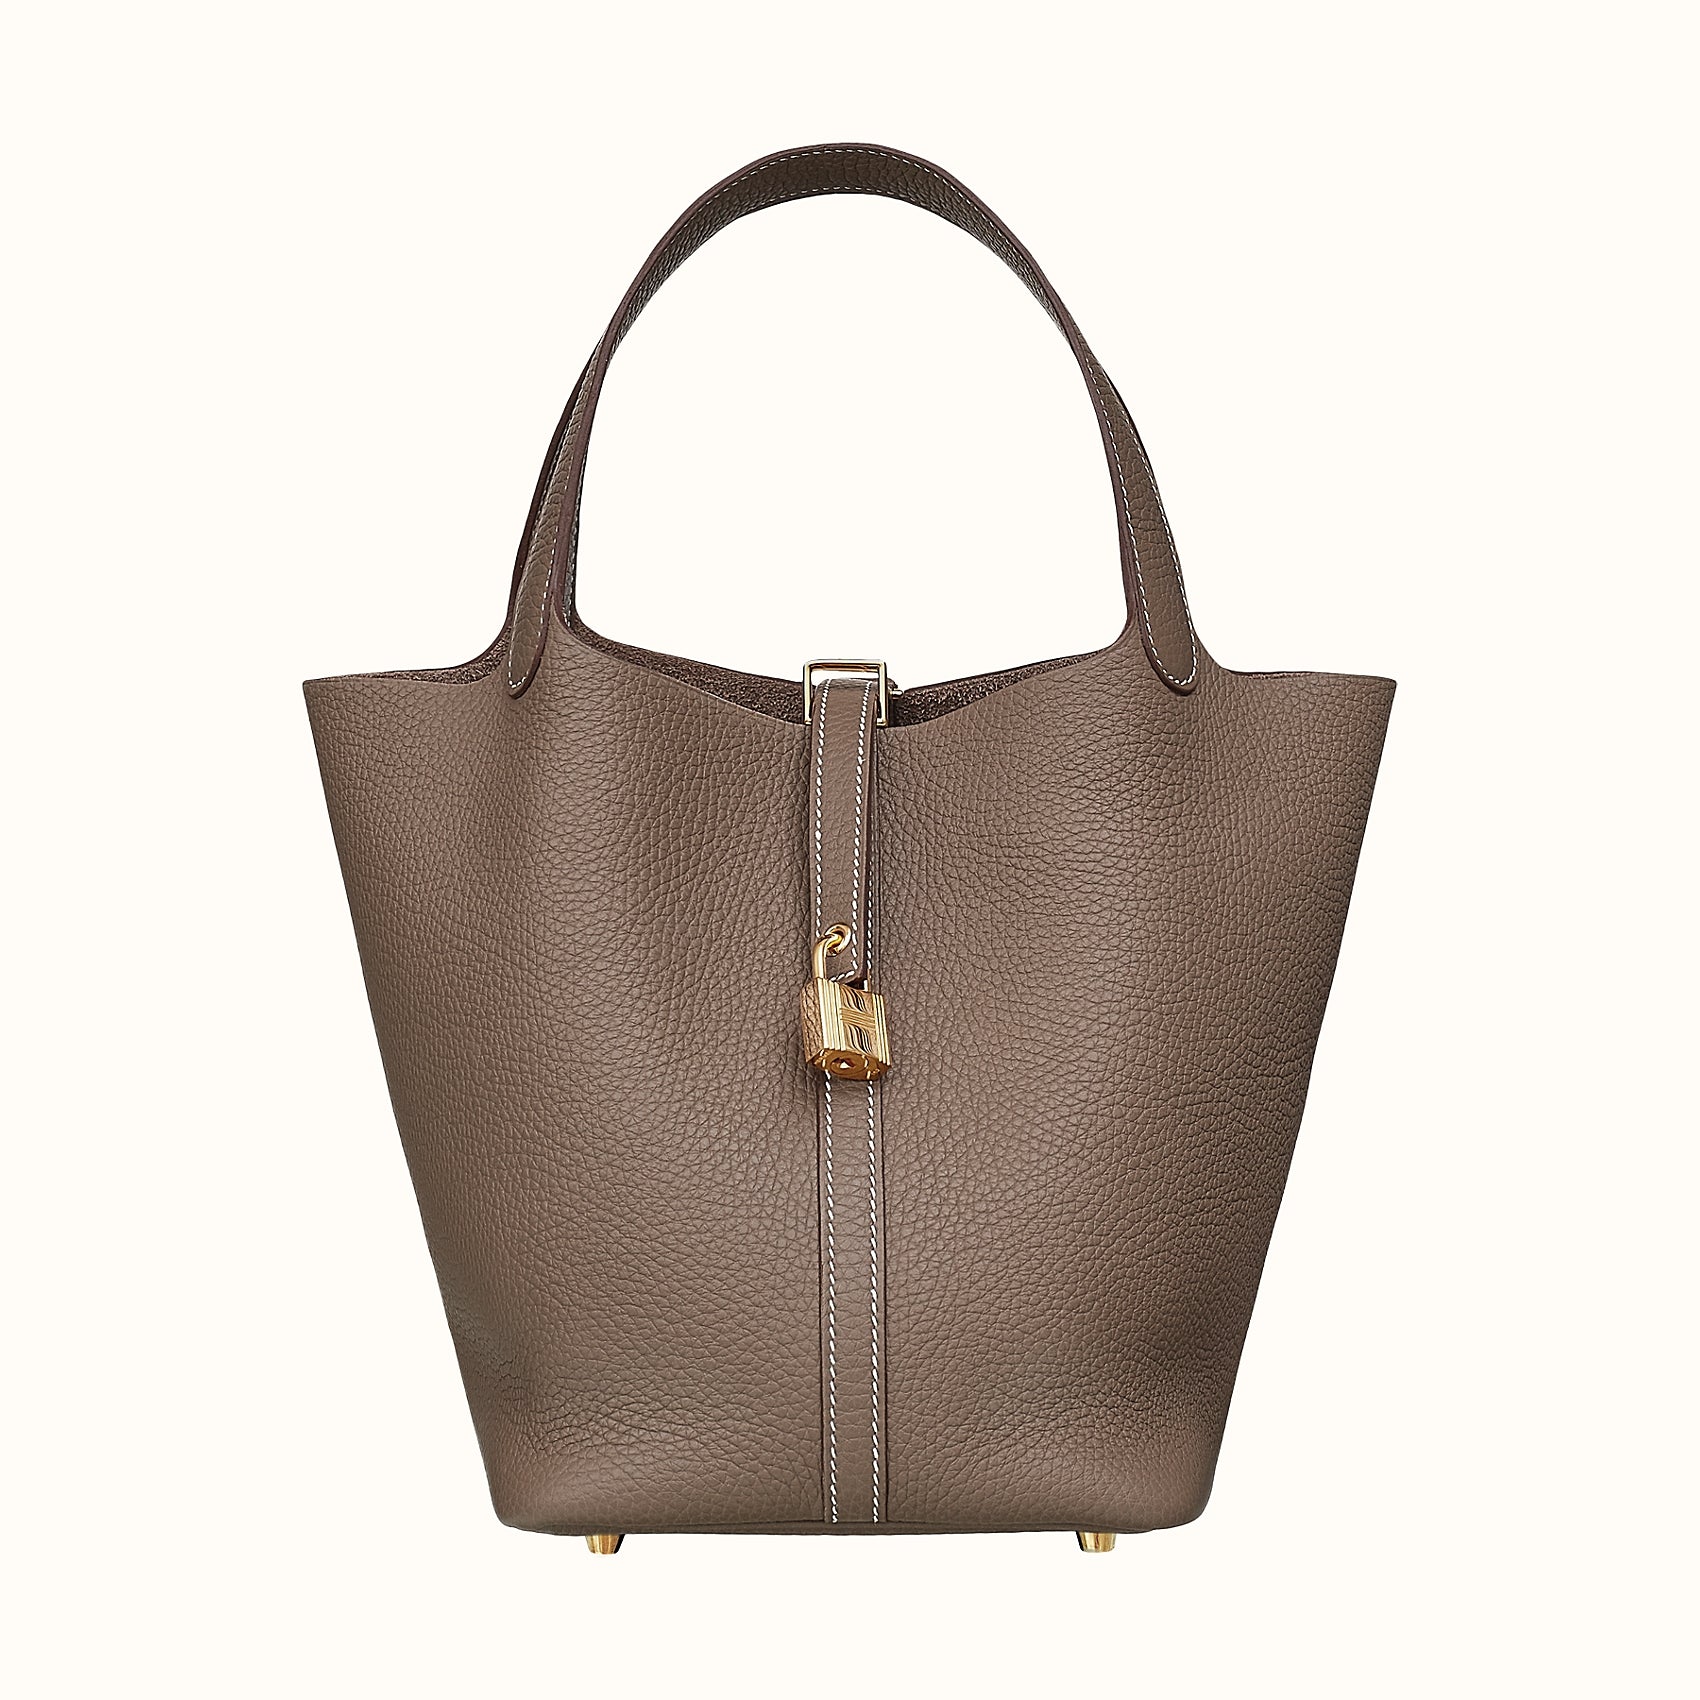 Hermes Picotin 22 in Taurillon Clemence 18 Etoupe Leather